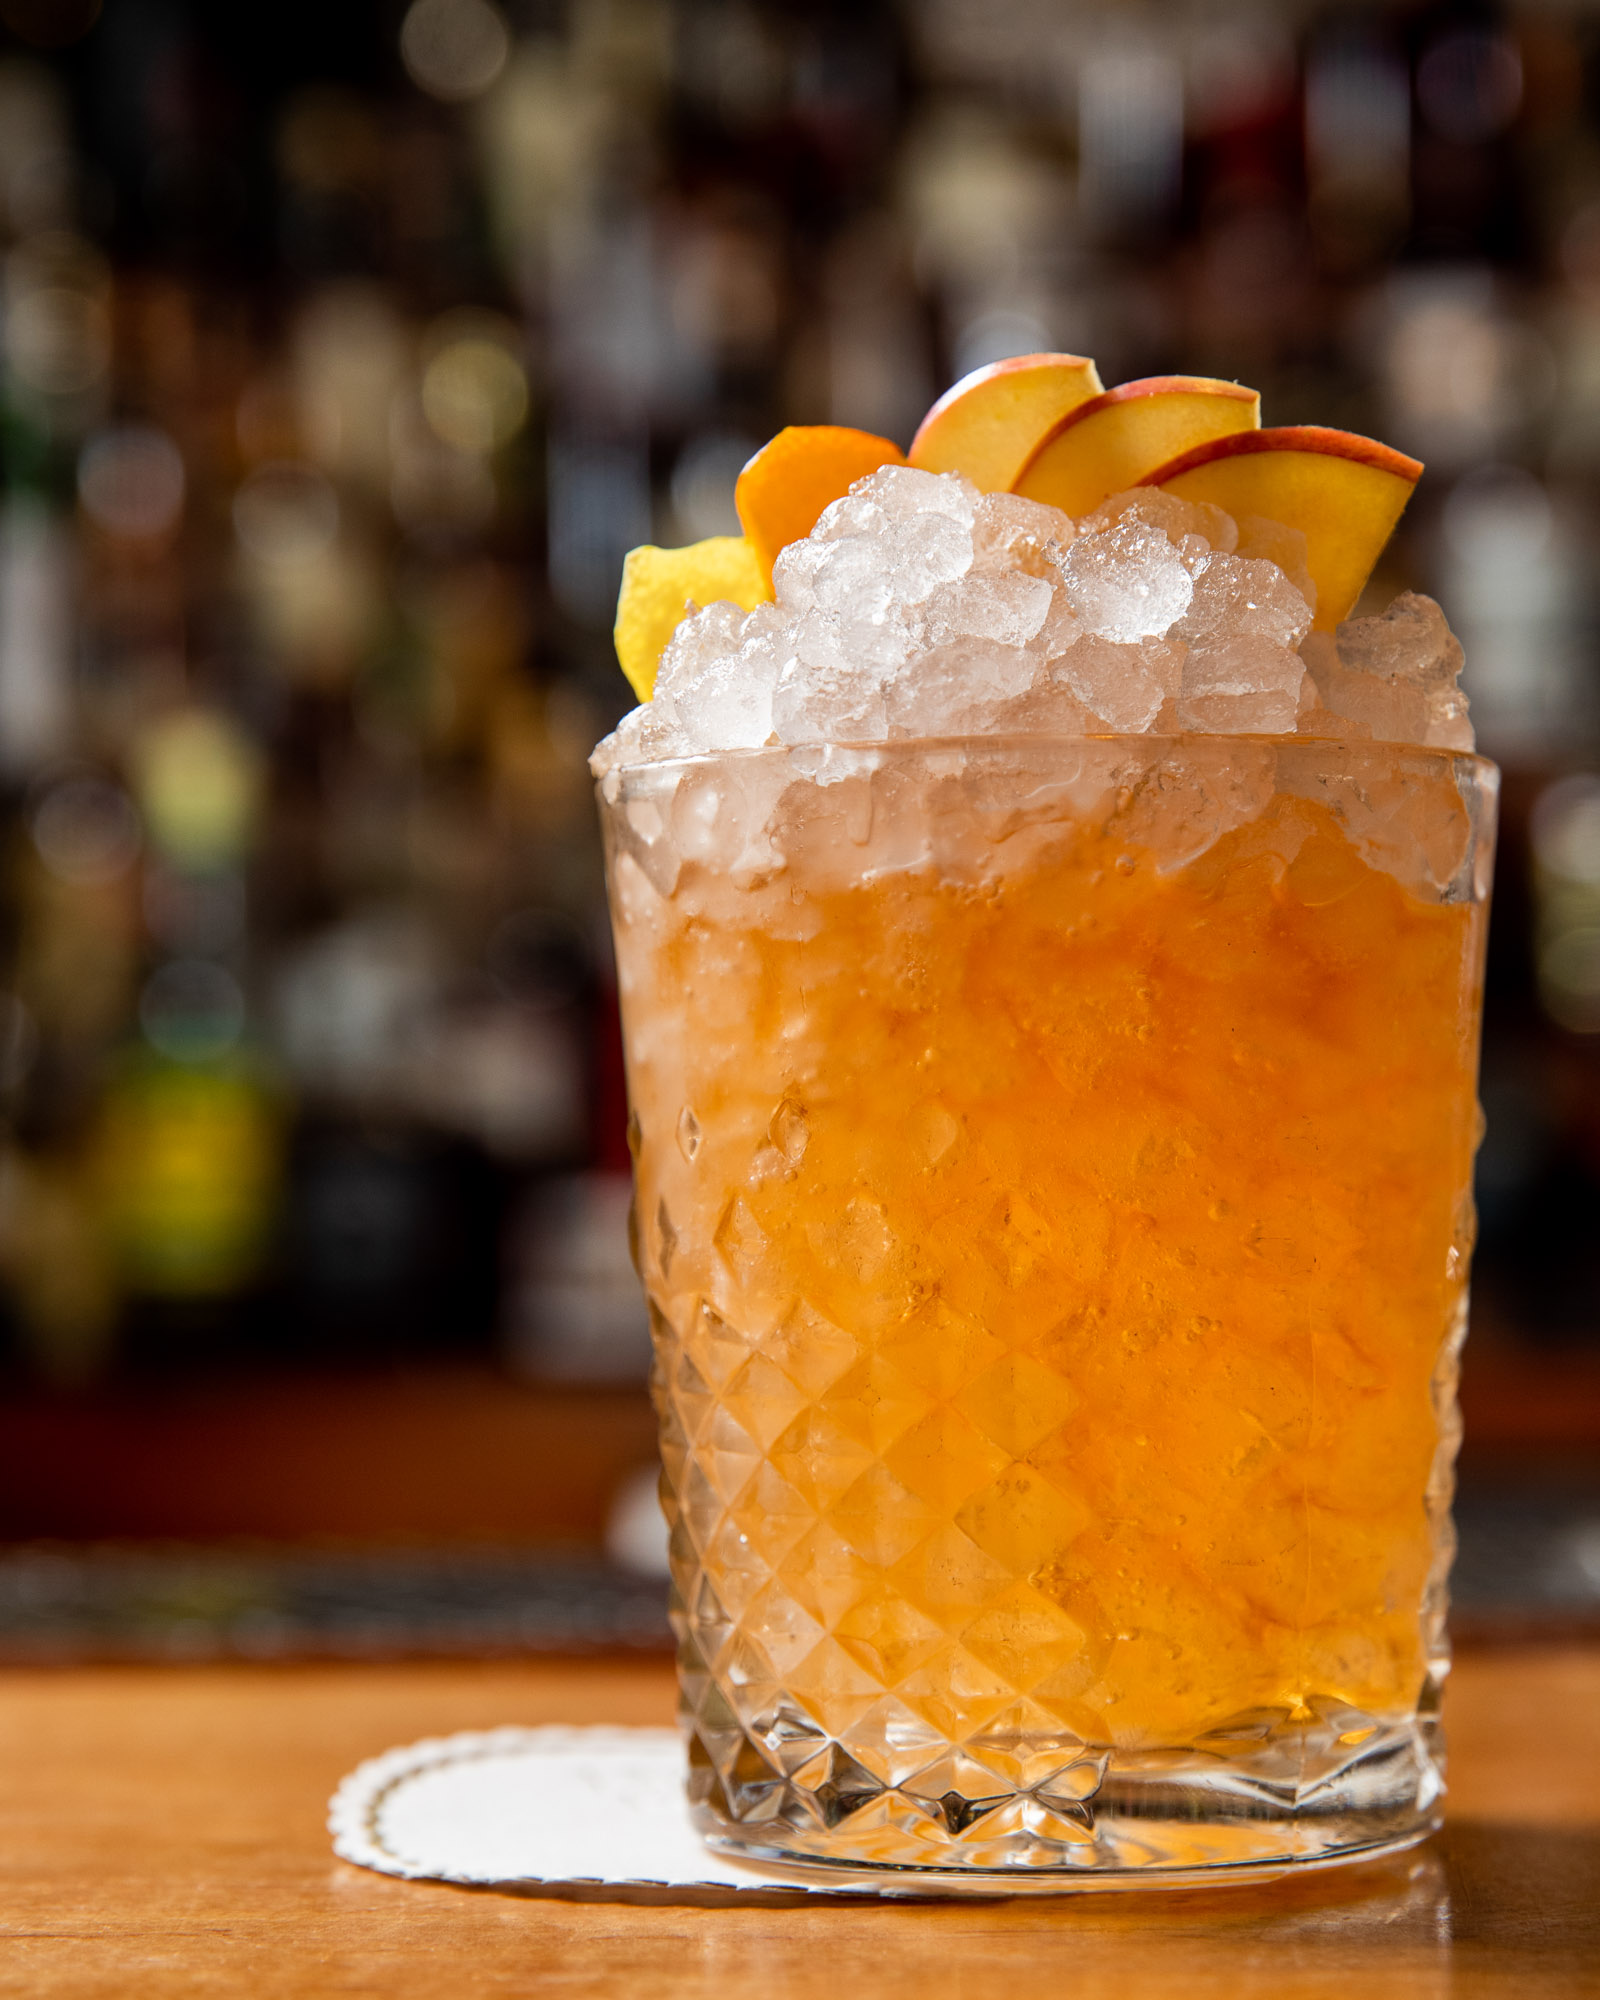 Tropical cocktail with a mound of ice and peach garnish